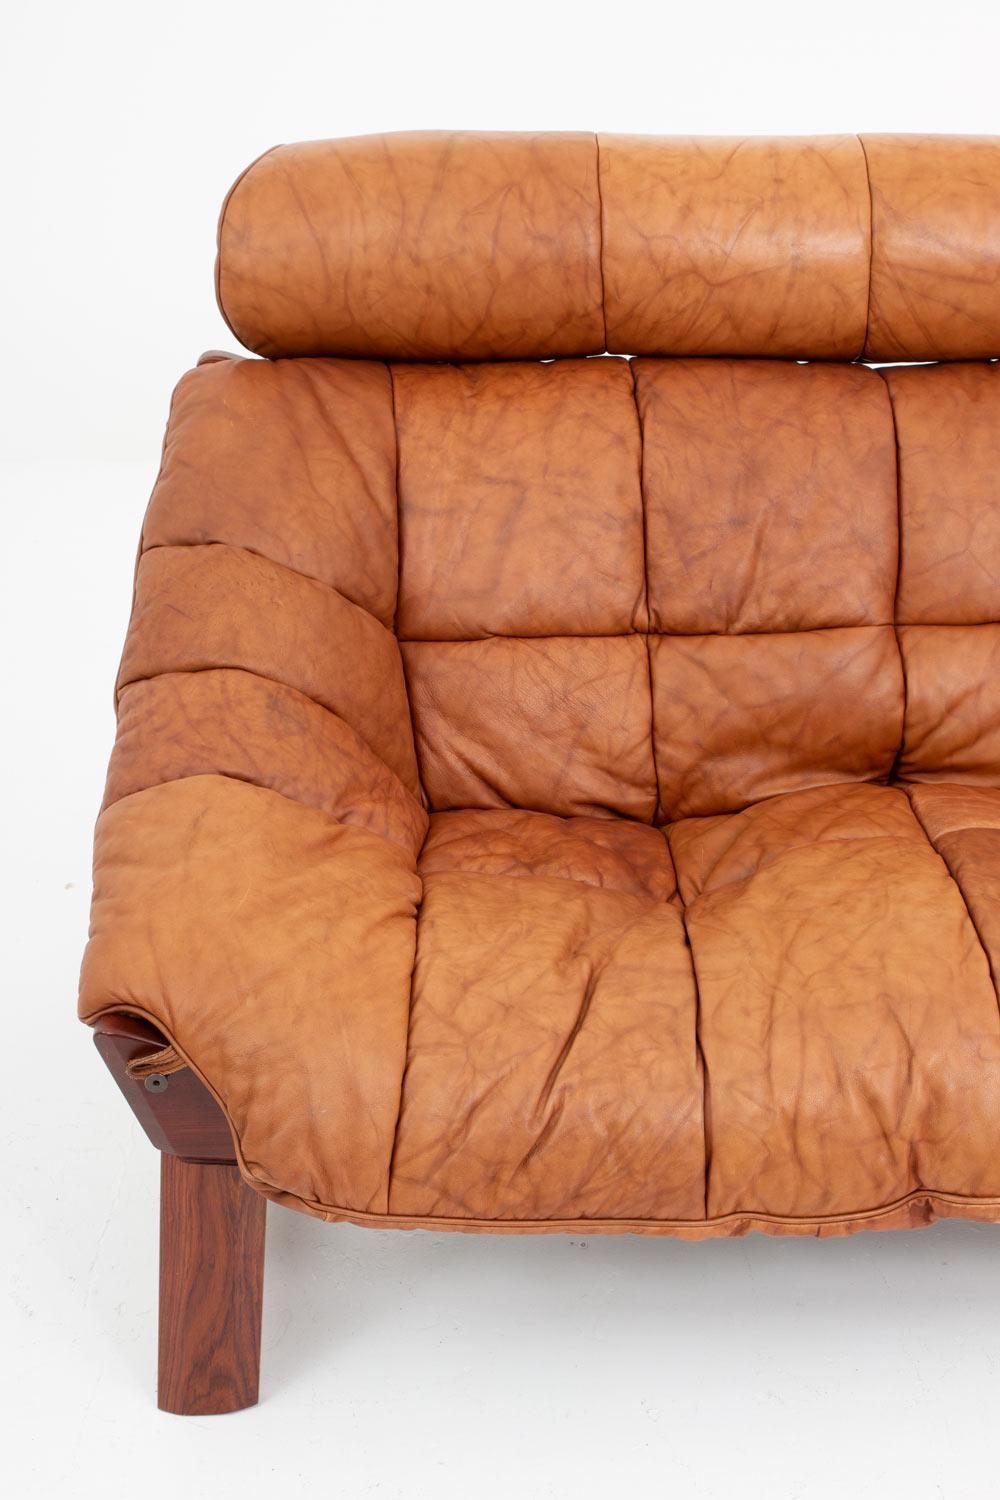 Percival Lafér-Style Sofas and Lounge Chair in Cognac Leather 7